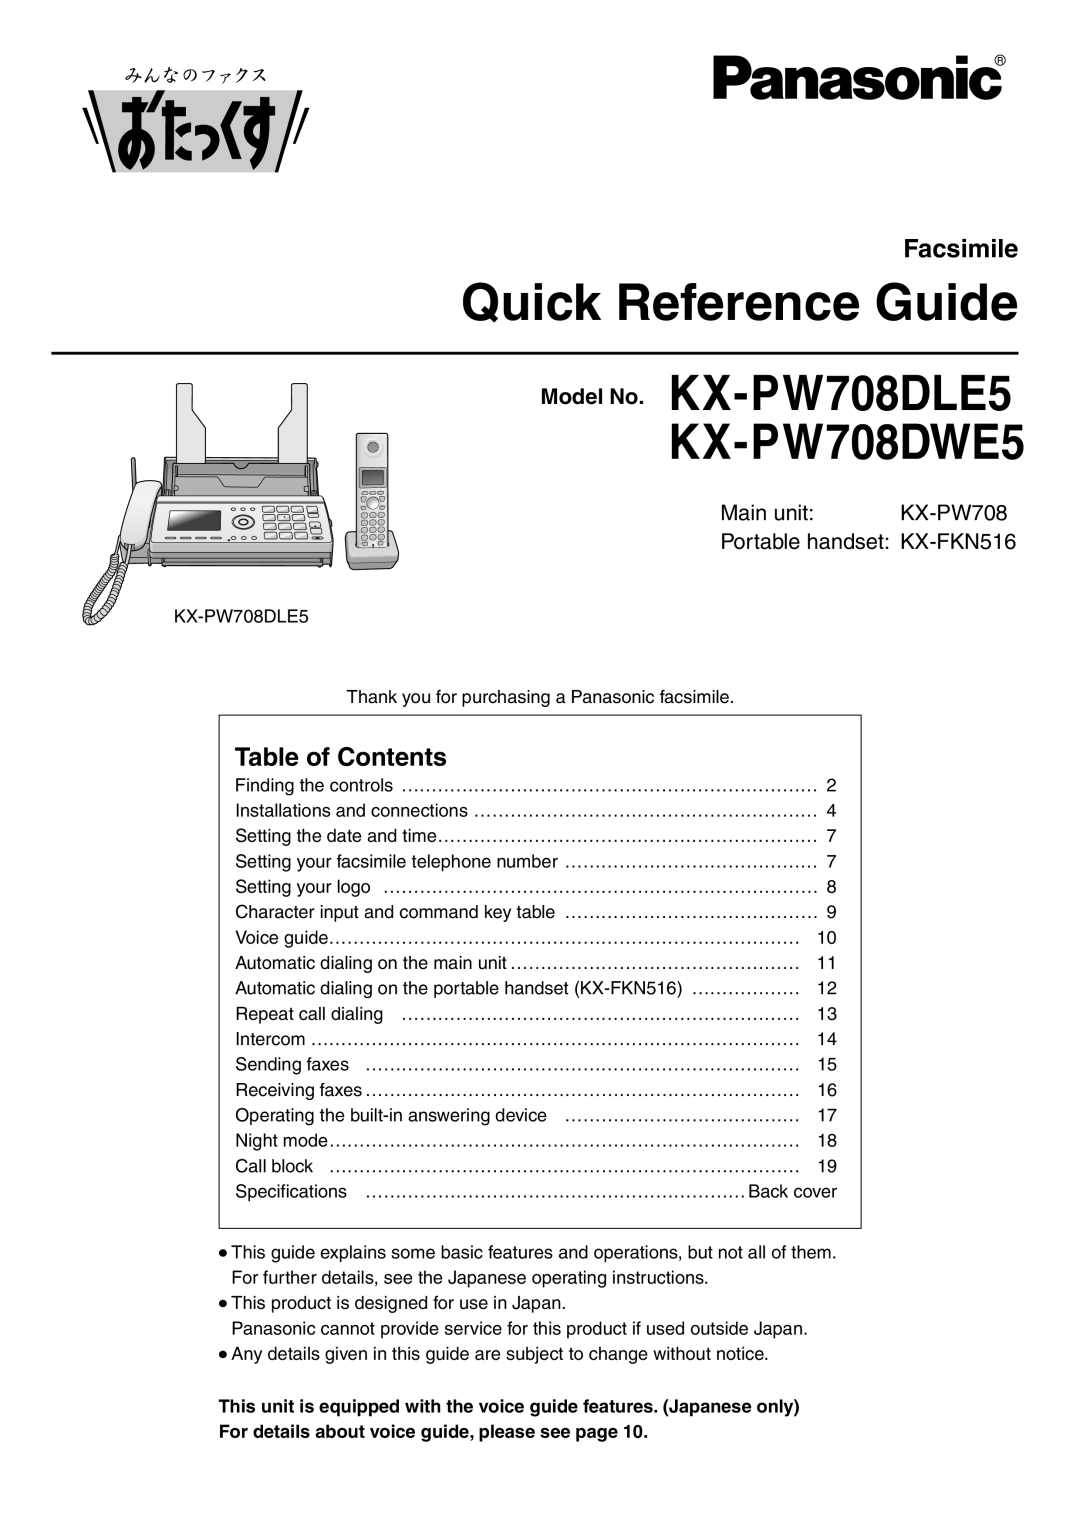 Panasonic specifications Quick Reference Guide, Model No. KX-PW708DLE5 KX-PW708DWE5, Facsimile, Table of Contents 